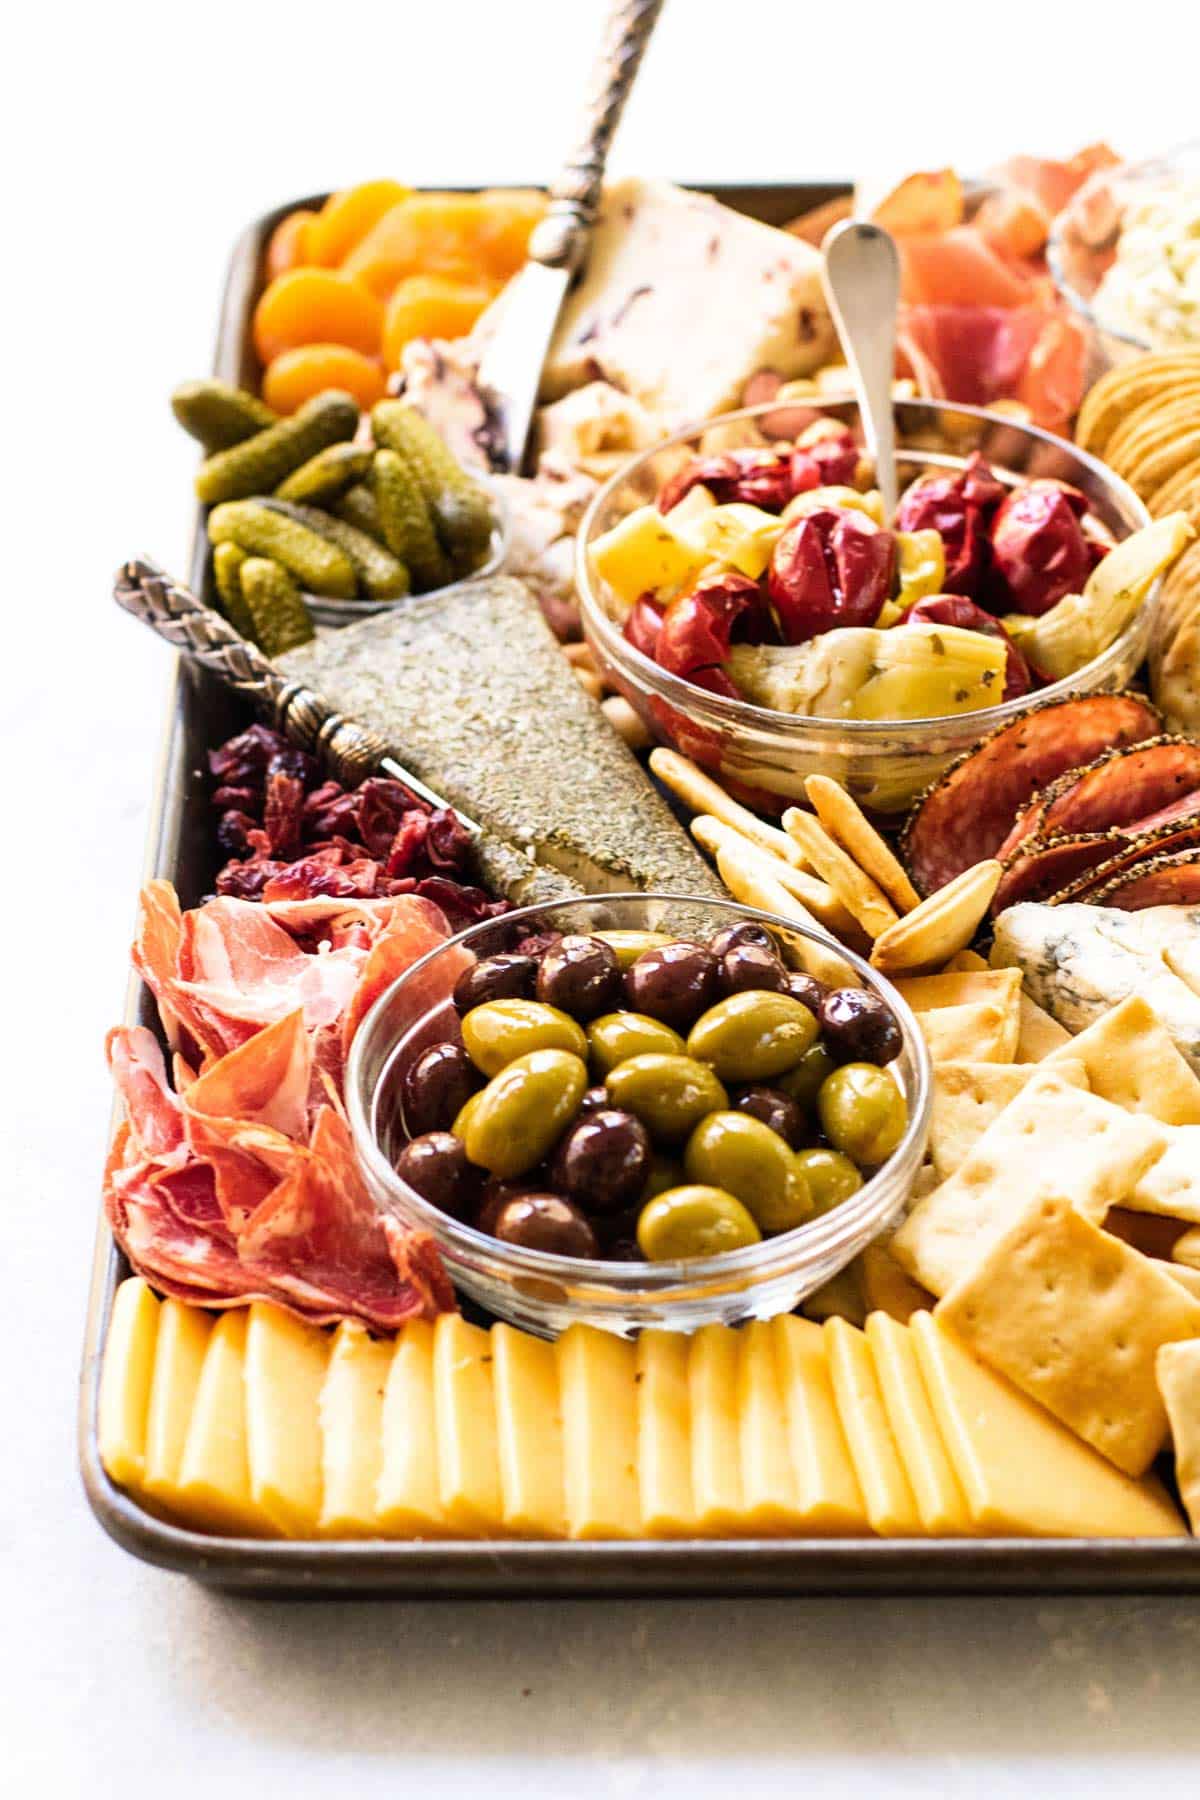 a cheeseboard with olives, sliced cheese, cheese wedges, crackers, and sliced meat.